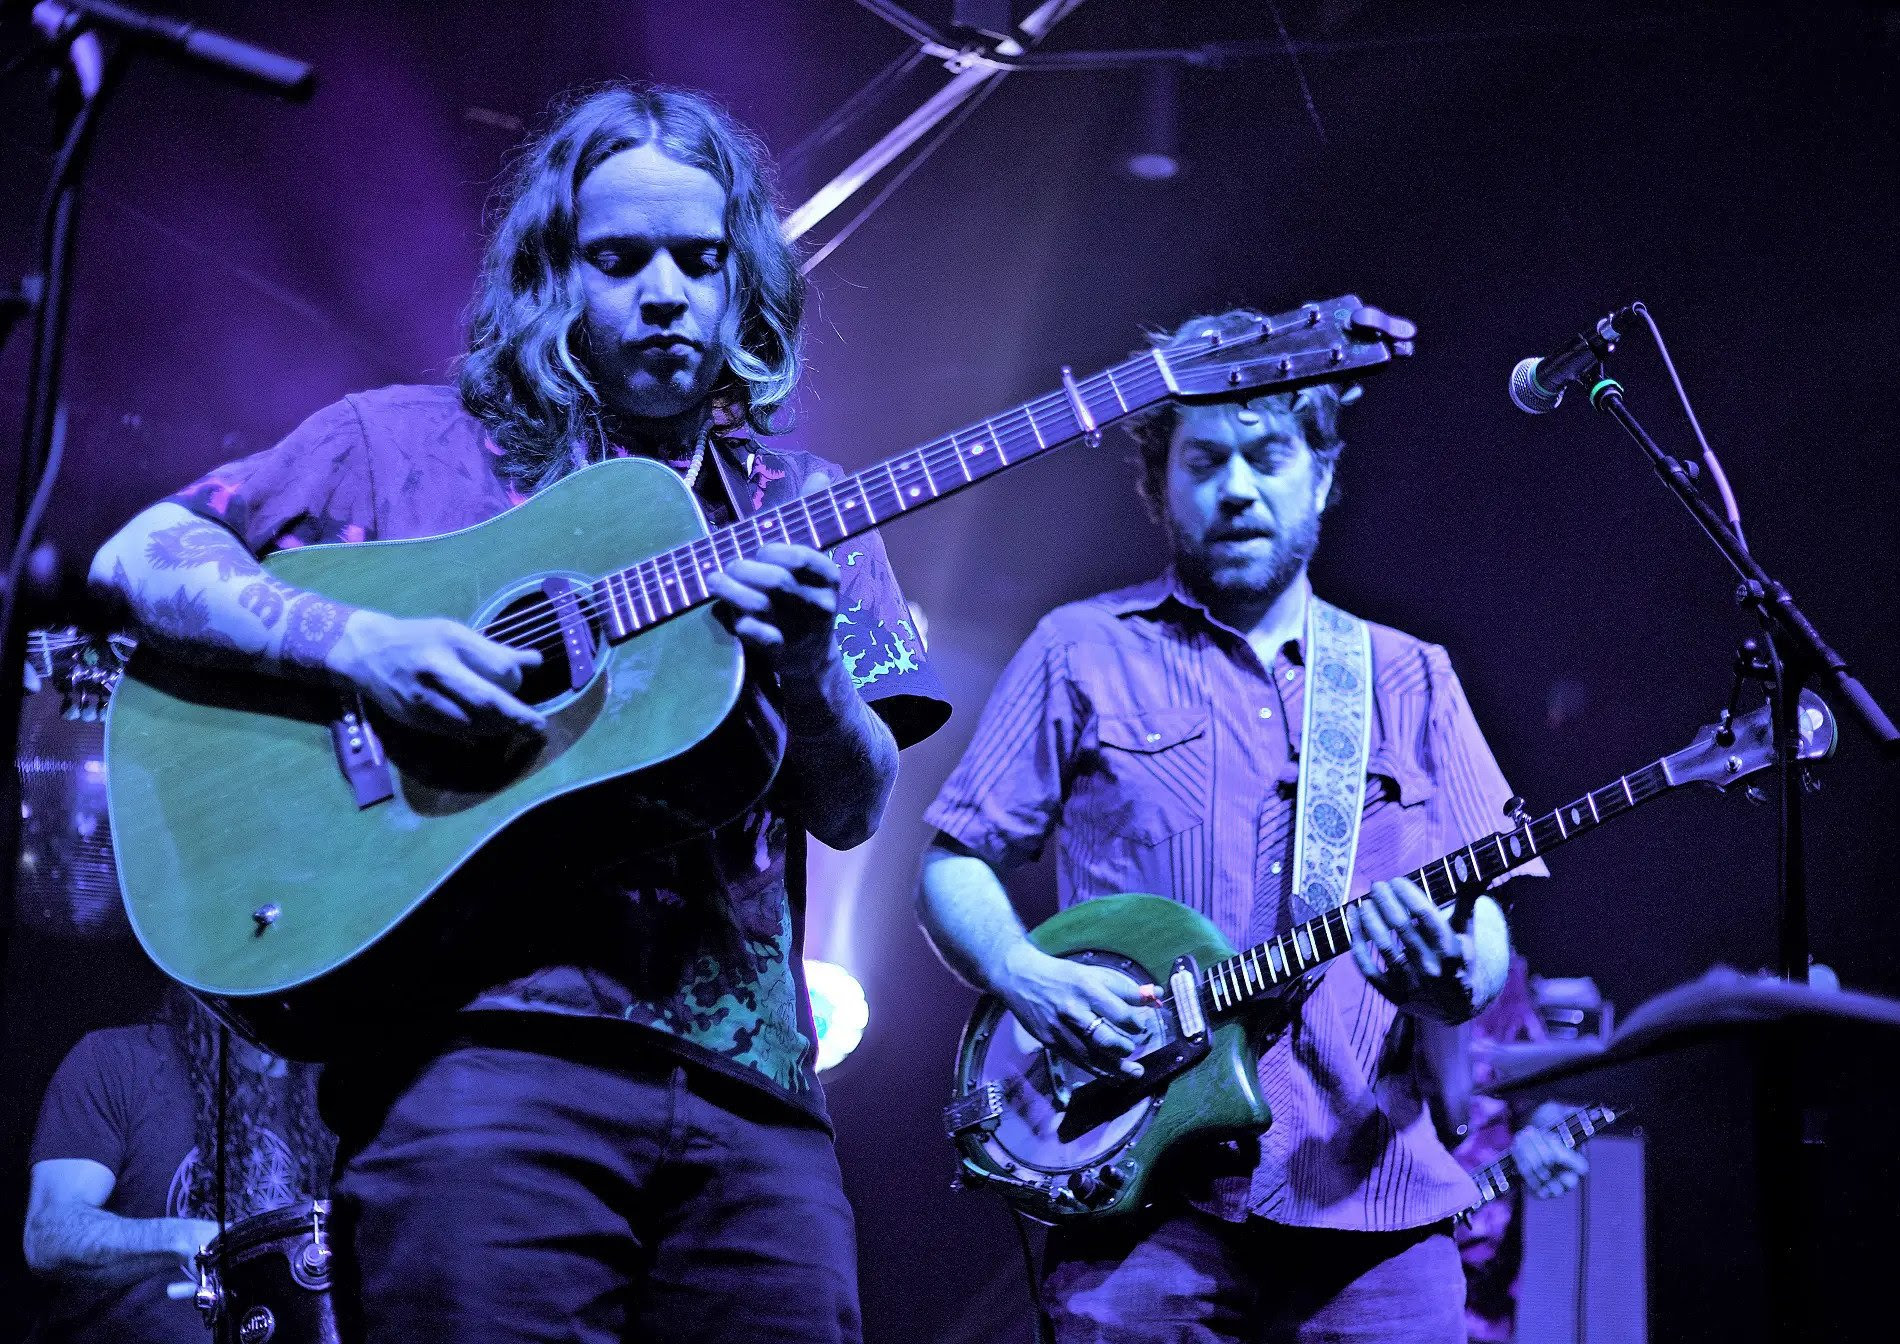 Watch the Rebroadcast of Billy Strings Sitting in with Ross James & Andy Thorn's Electric Dead Grass at Knew Conscious